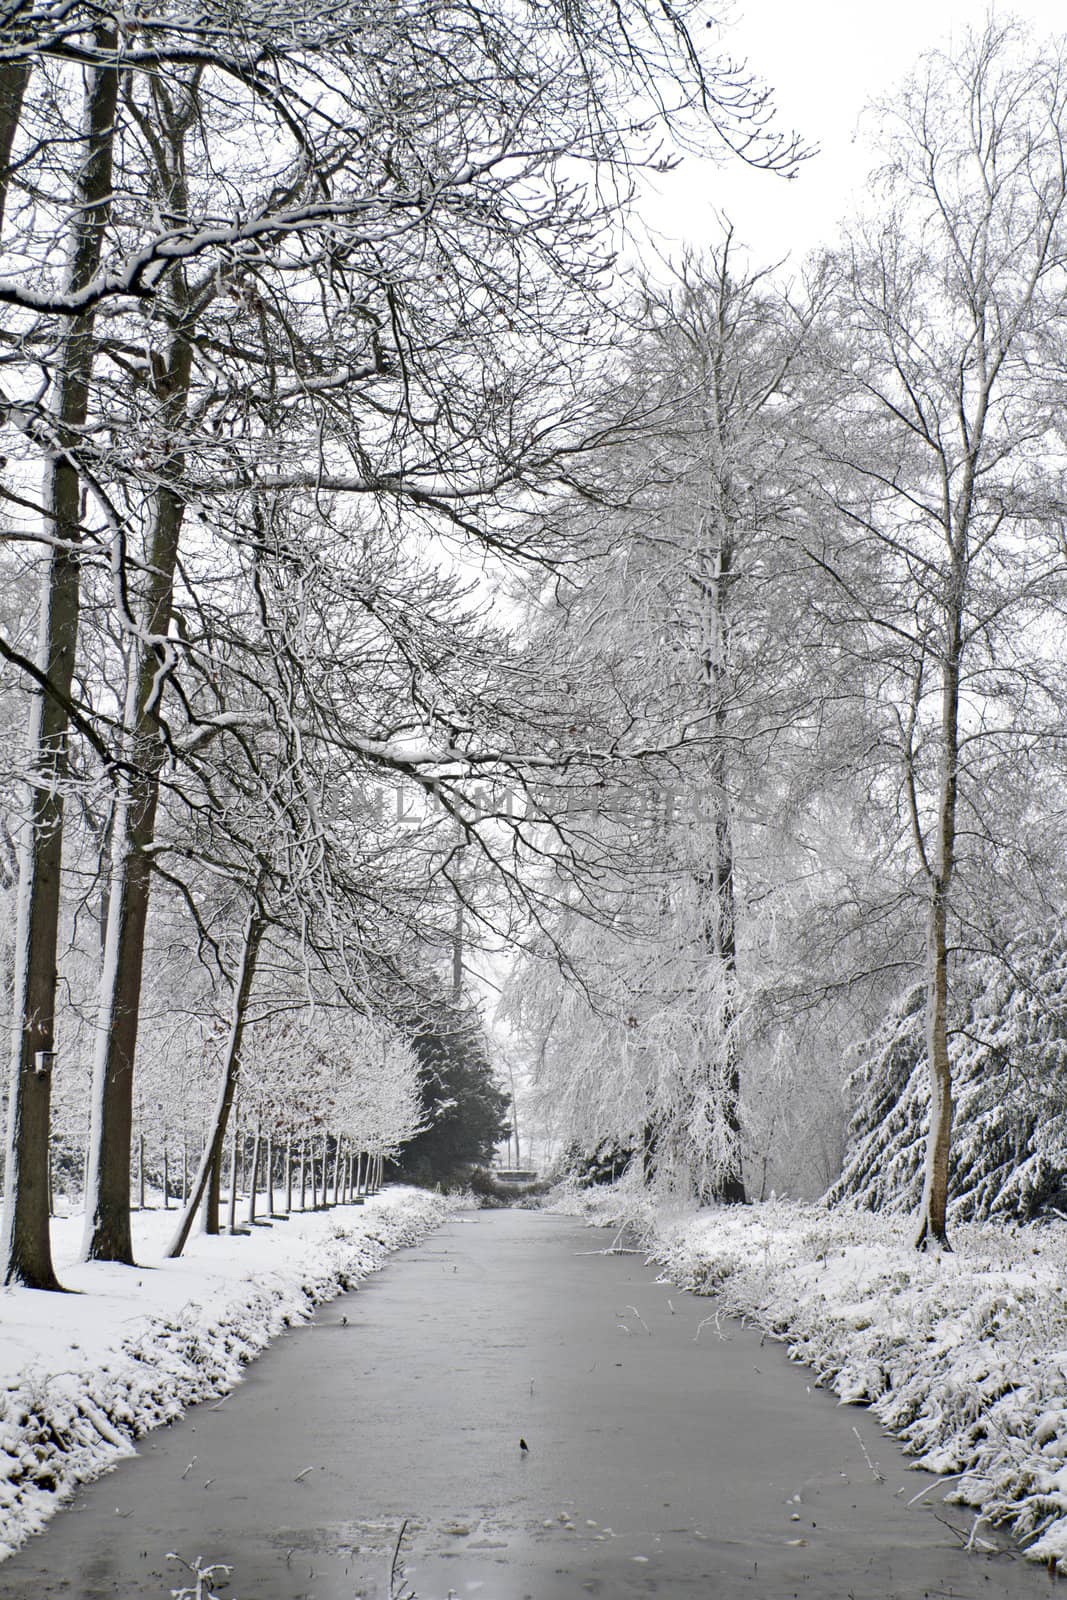 Snowy forest in winter in the Netherlands